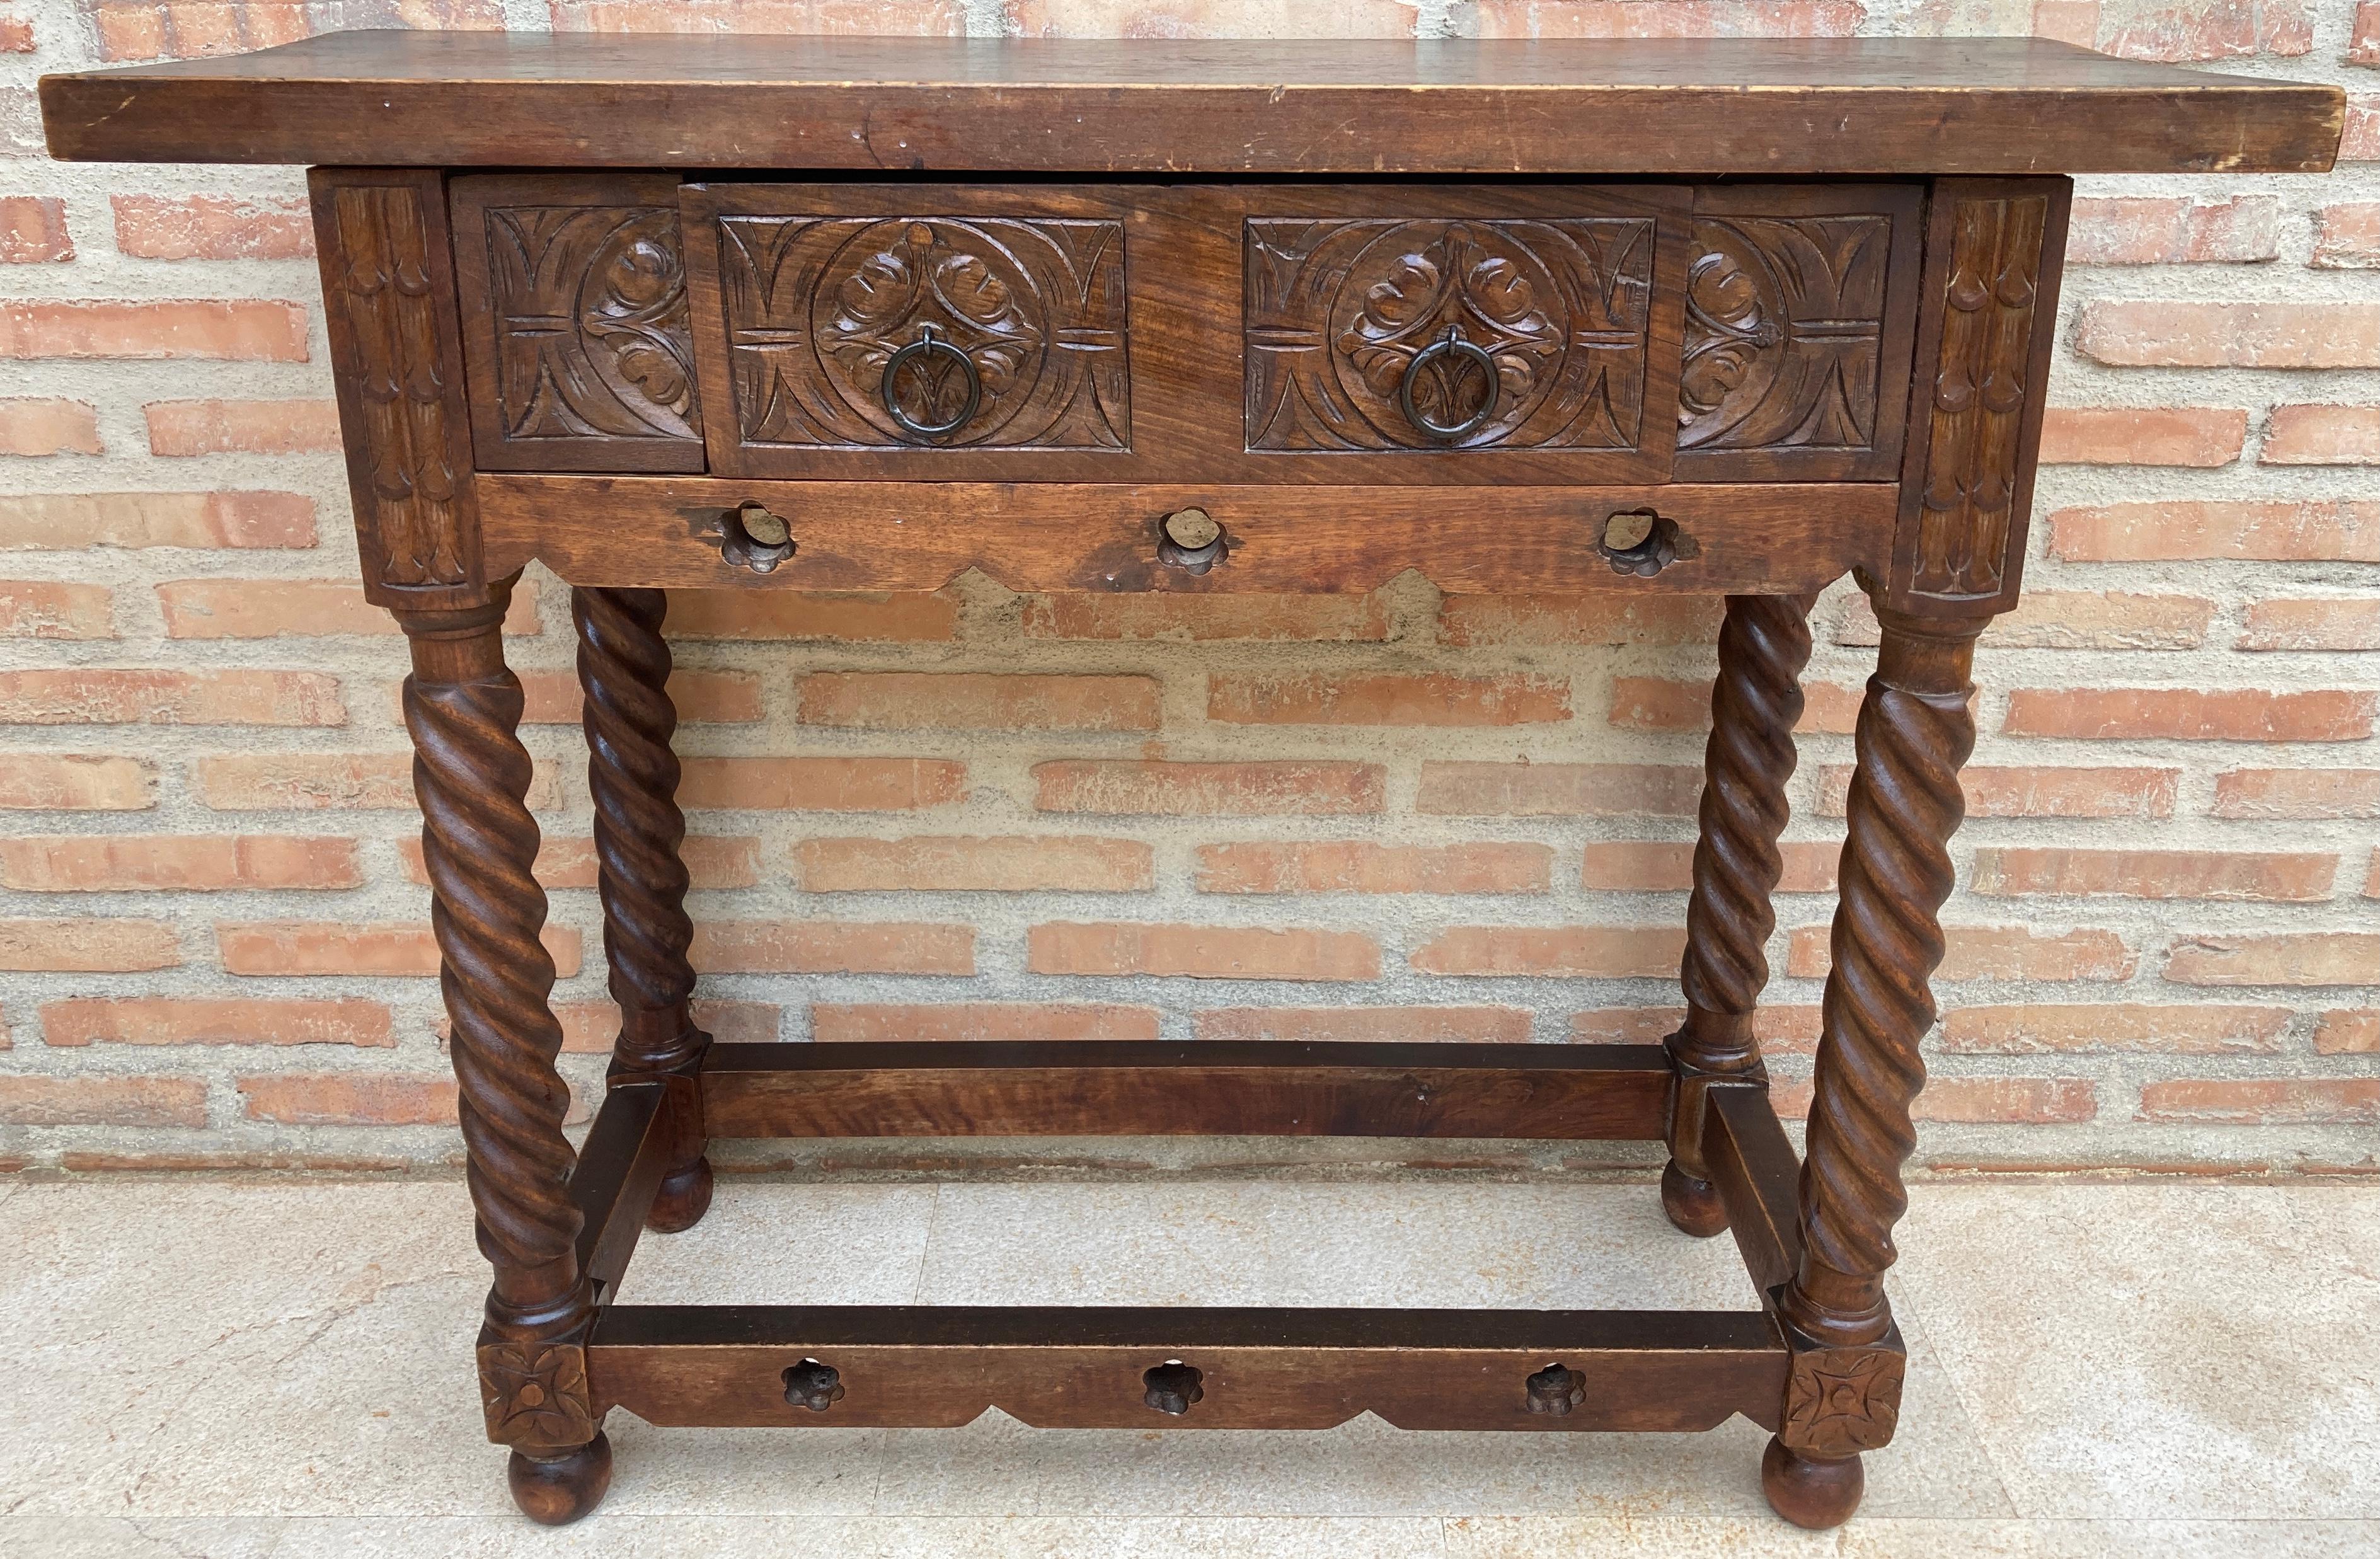 Early 20th century walnut console table with slab top on a frieze with one drawer front decorated with carved and incised floral motifs with additional decoration and two original iron pulls . The table rests on a hand-carved base with Solomonic